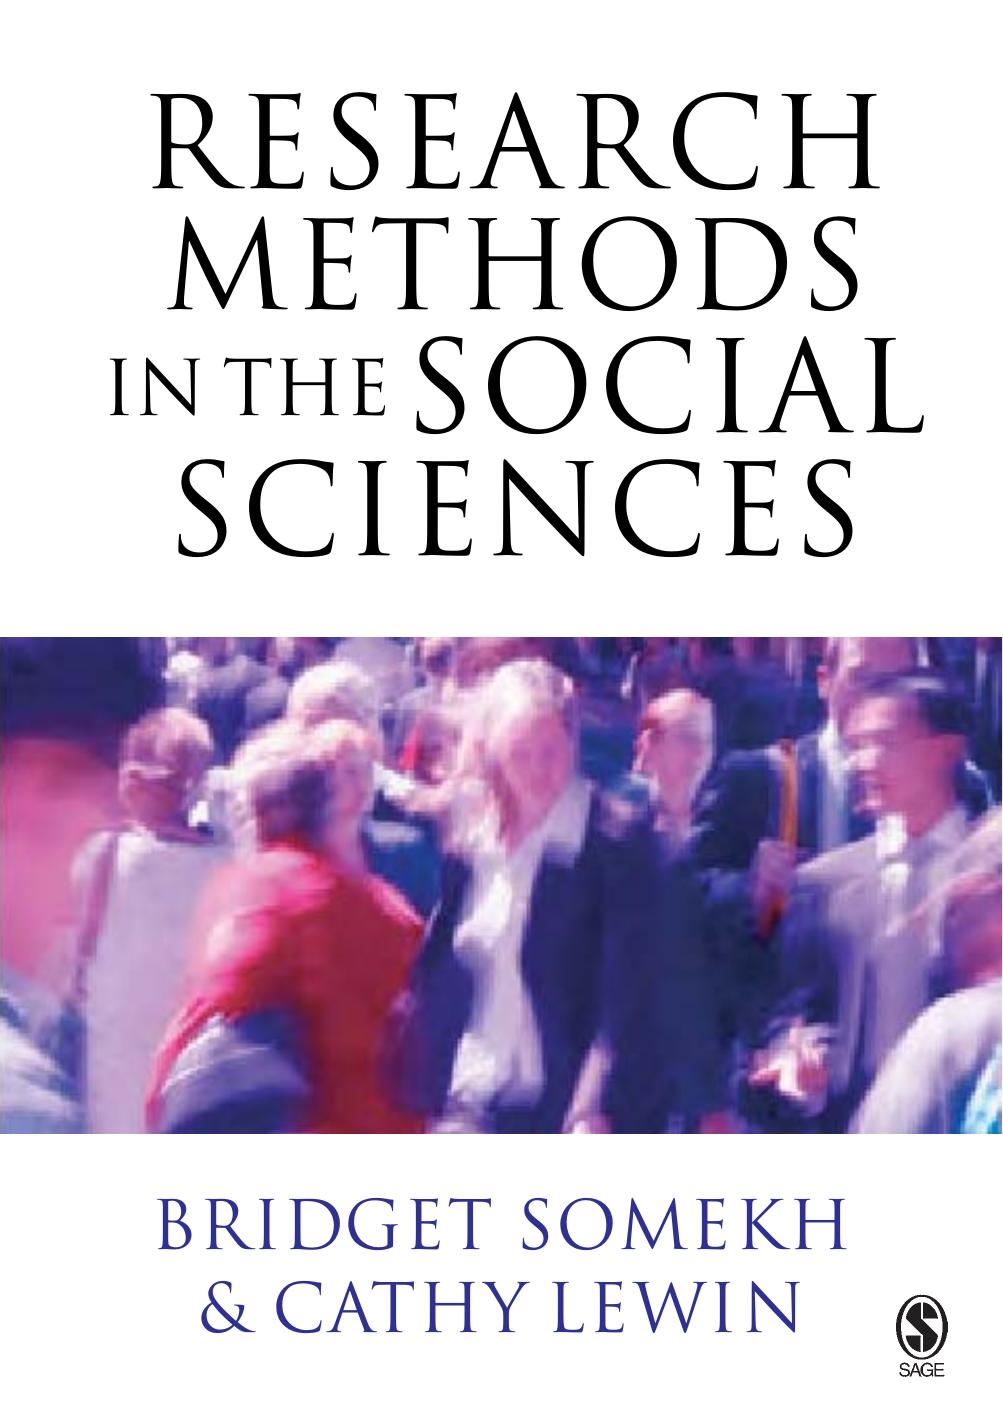 36 Research Methods in the Social Sciences 2018